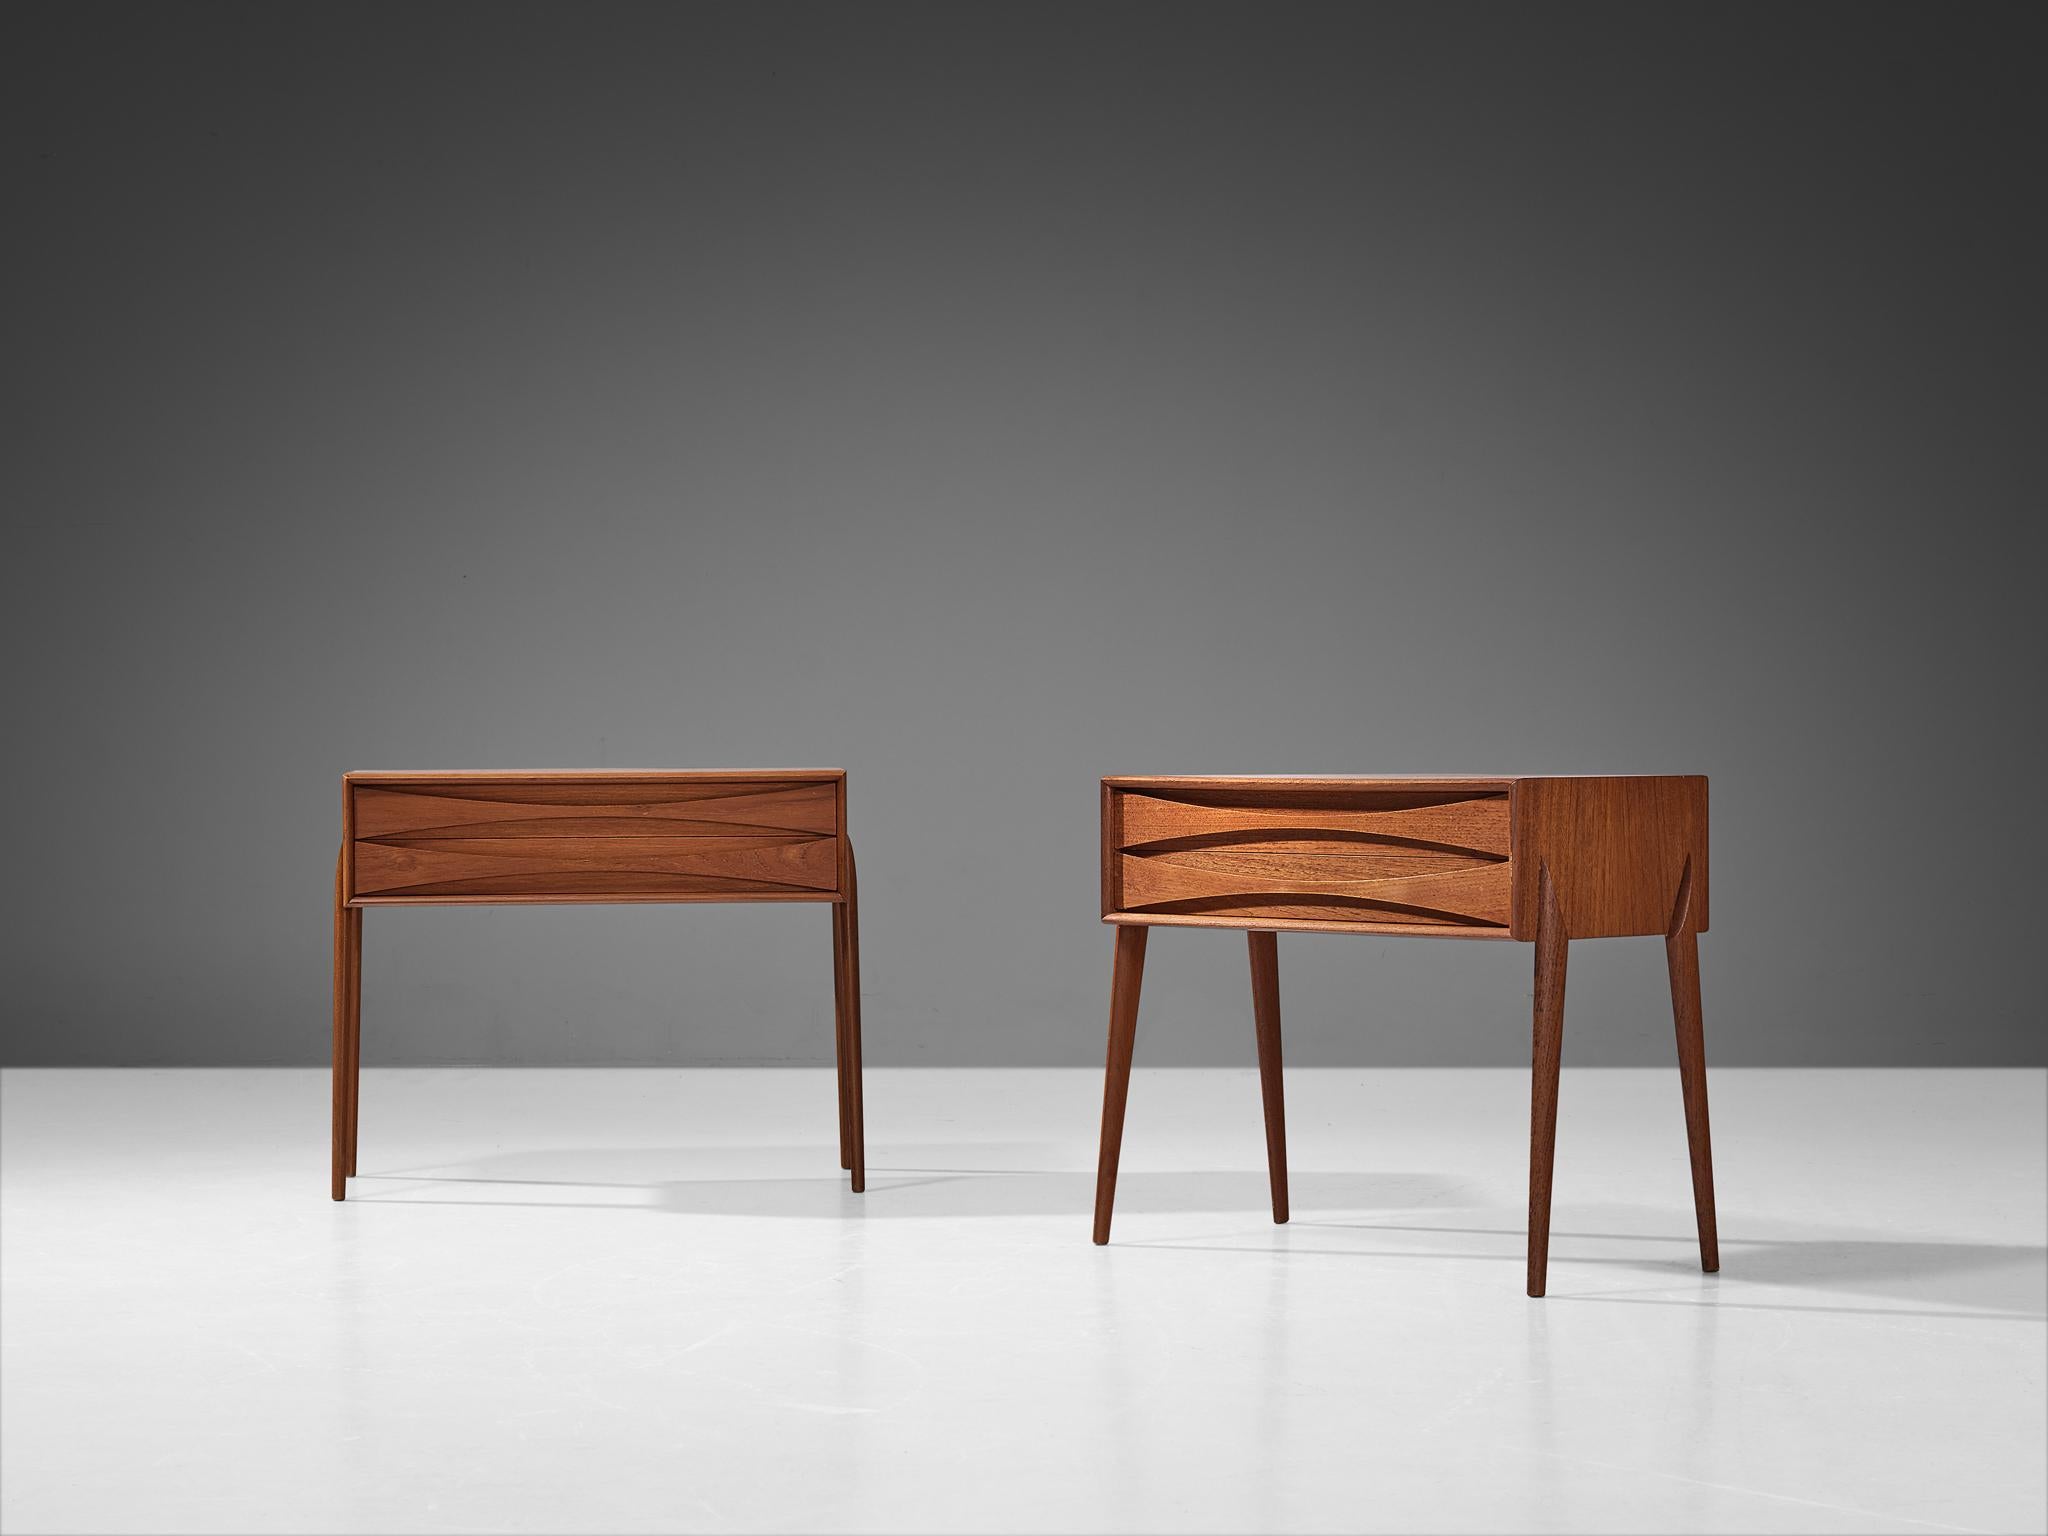 Rimbert Sandholt for Ateljé Glas & Trä, pair of night stands or side tables, teak, Sweden, 1960s.

This charming pair of nightstands or side tables is designed by the Swedish designer Rimbert Sandholt. This pair is well-constructed in a precise